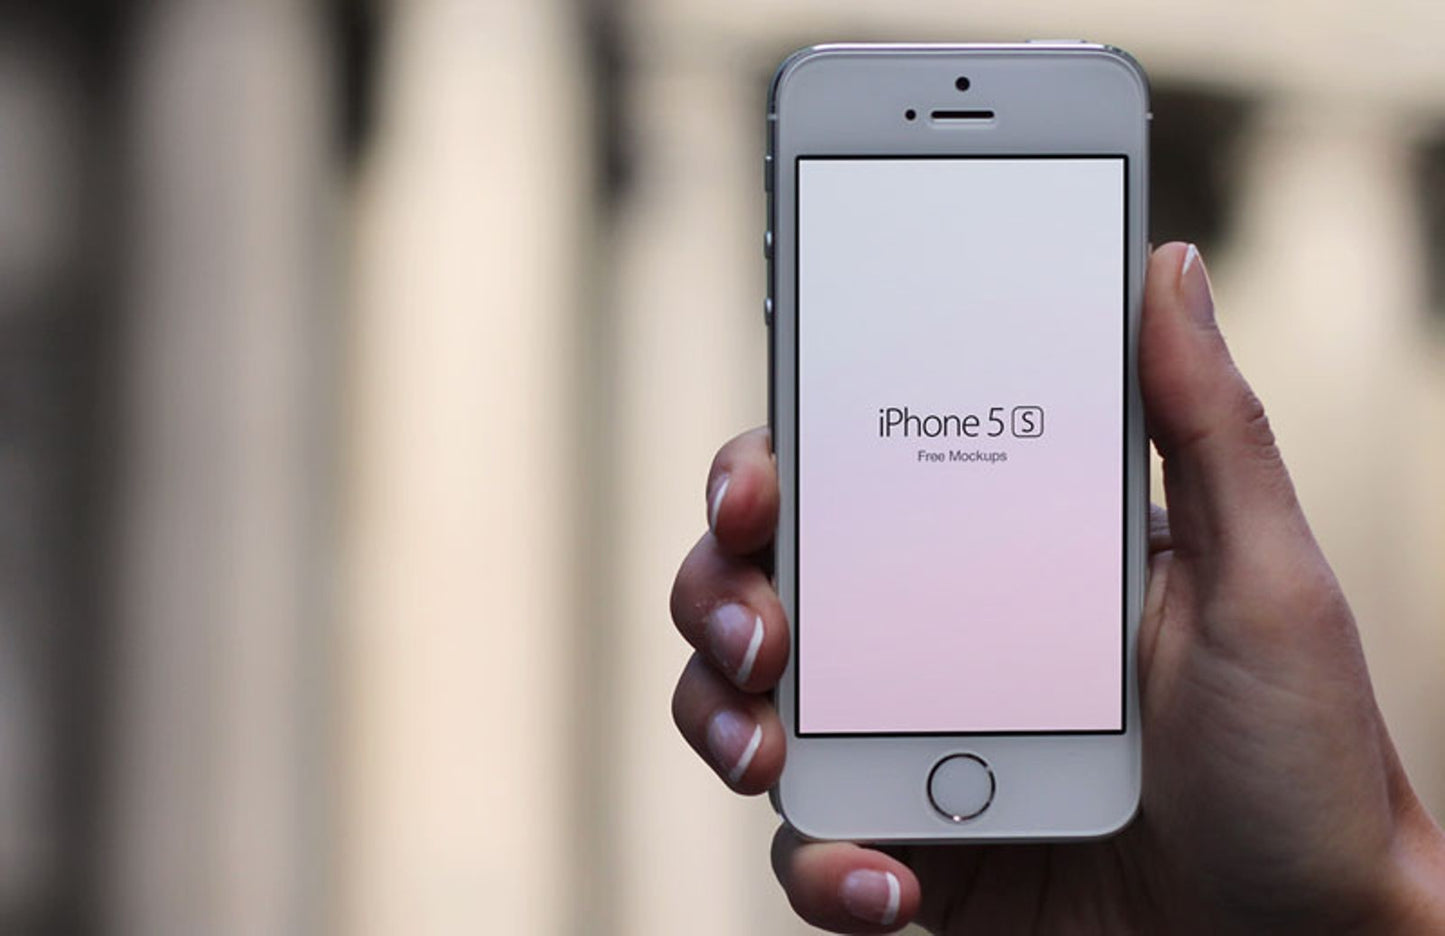 Free Set of iPhone 5S In Hand (Mockup)